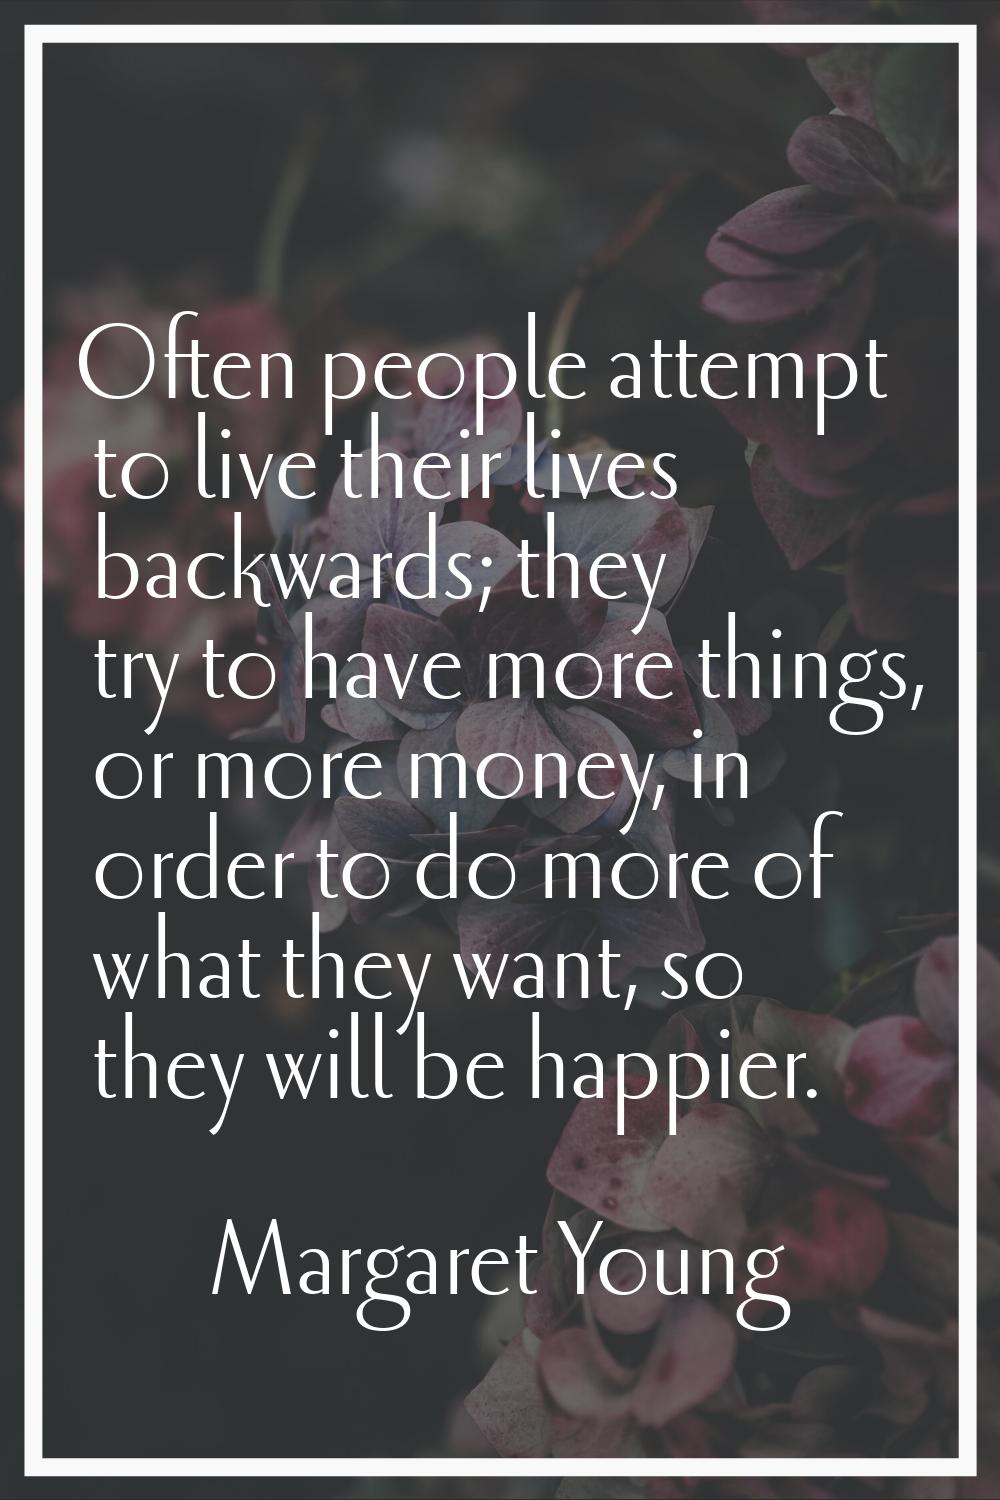 Often people attempt to live their lives backwards; they try to have more things, or more money, in